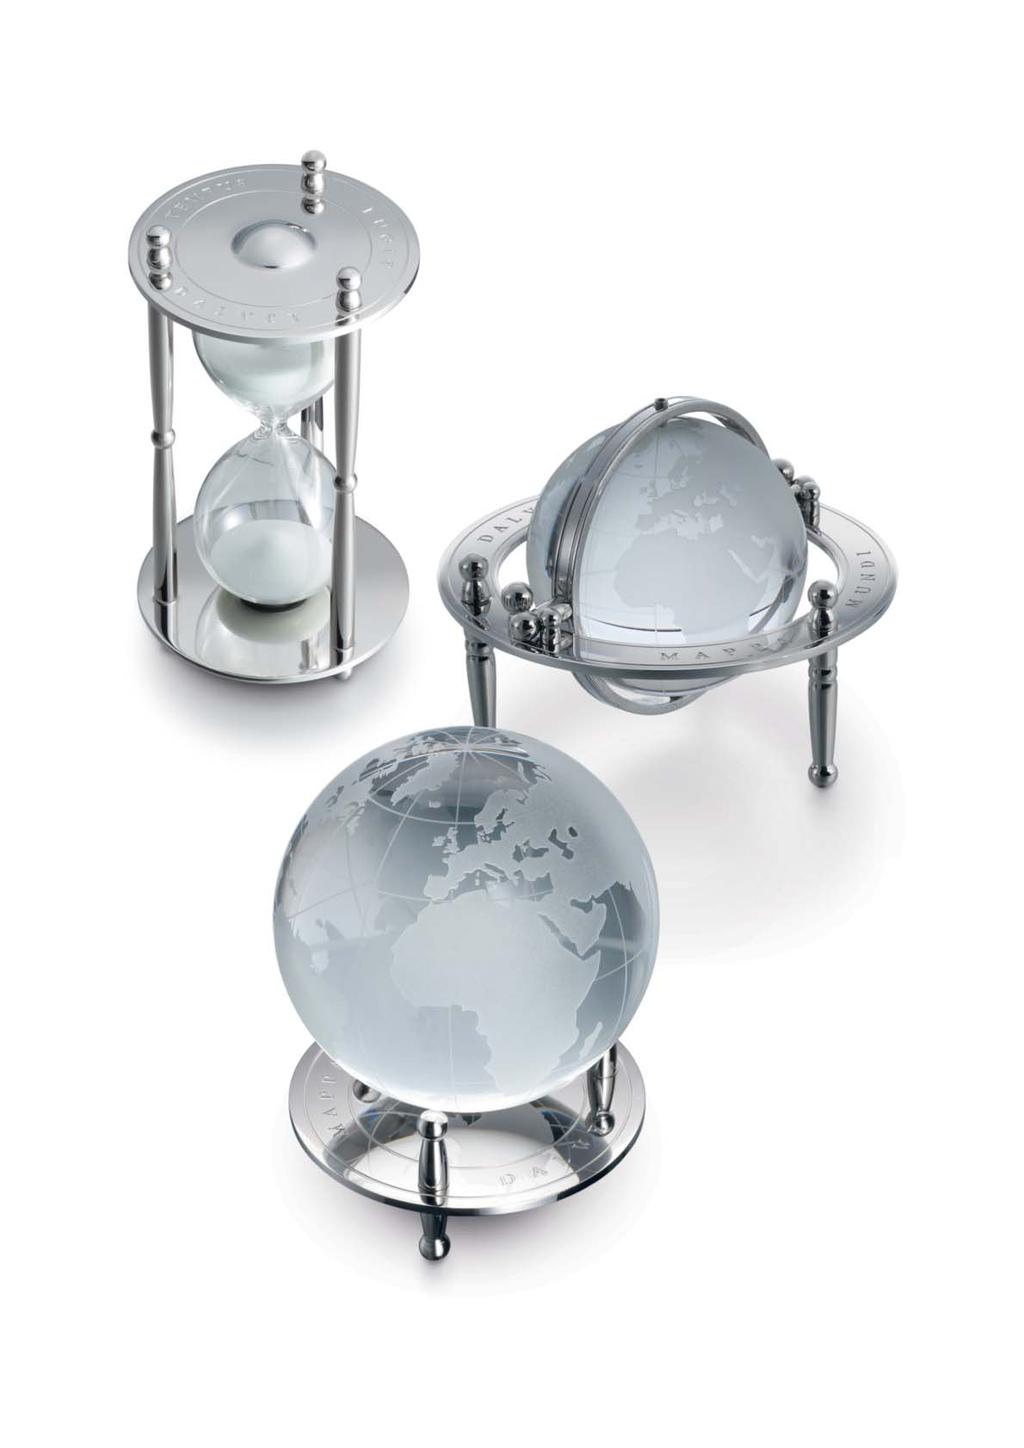 GIMBAL GLOBE An etched orb of crystal glass revolves in all directions in this striking gimbal cradle.